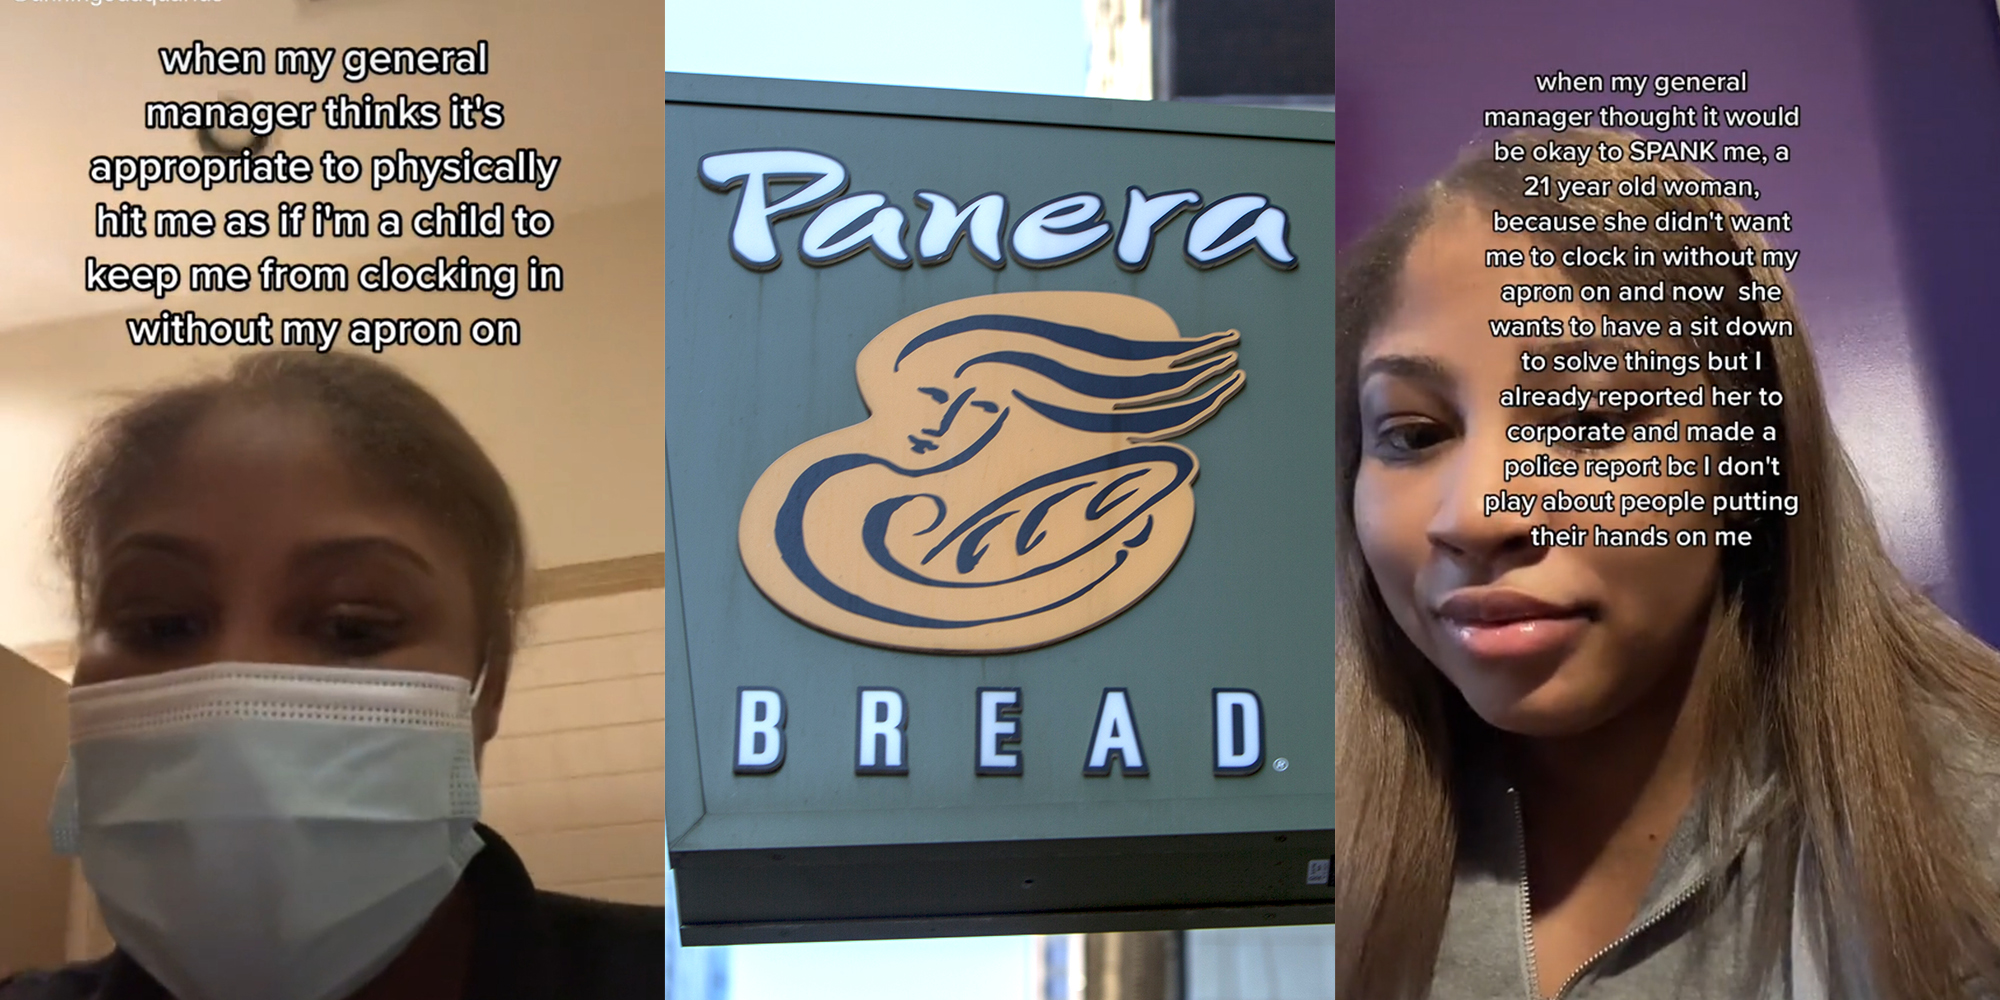 21-Year-Old Worker Says Her Manager at Panera Spanked photo photo